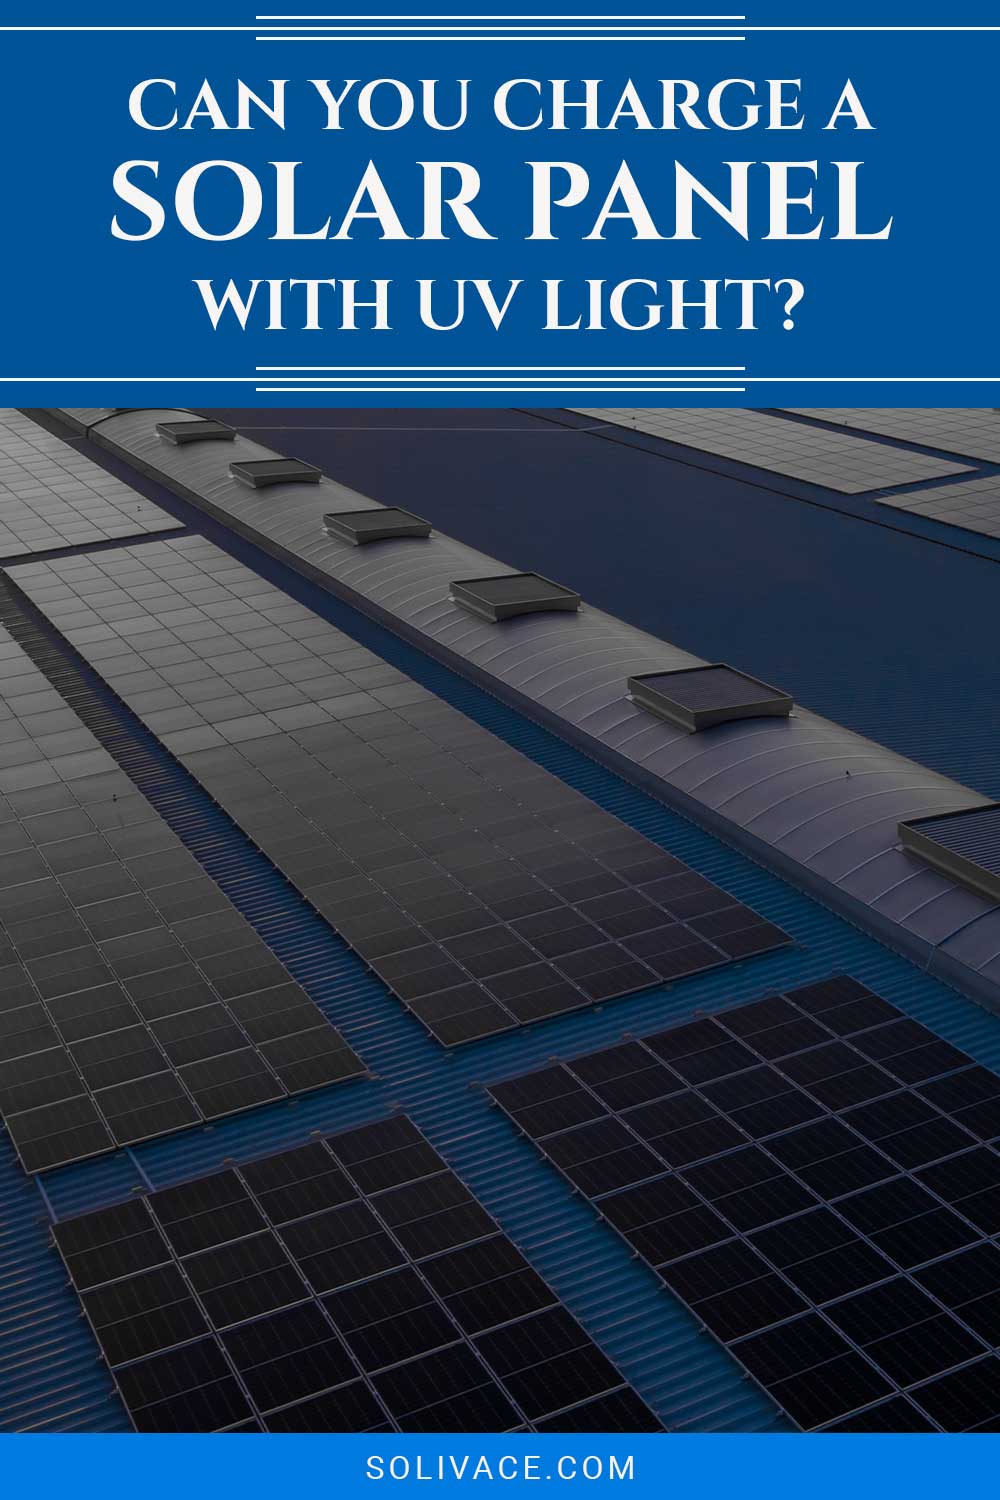 Can You Charge a Solar Panel with UV Light?